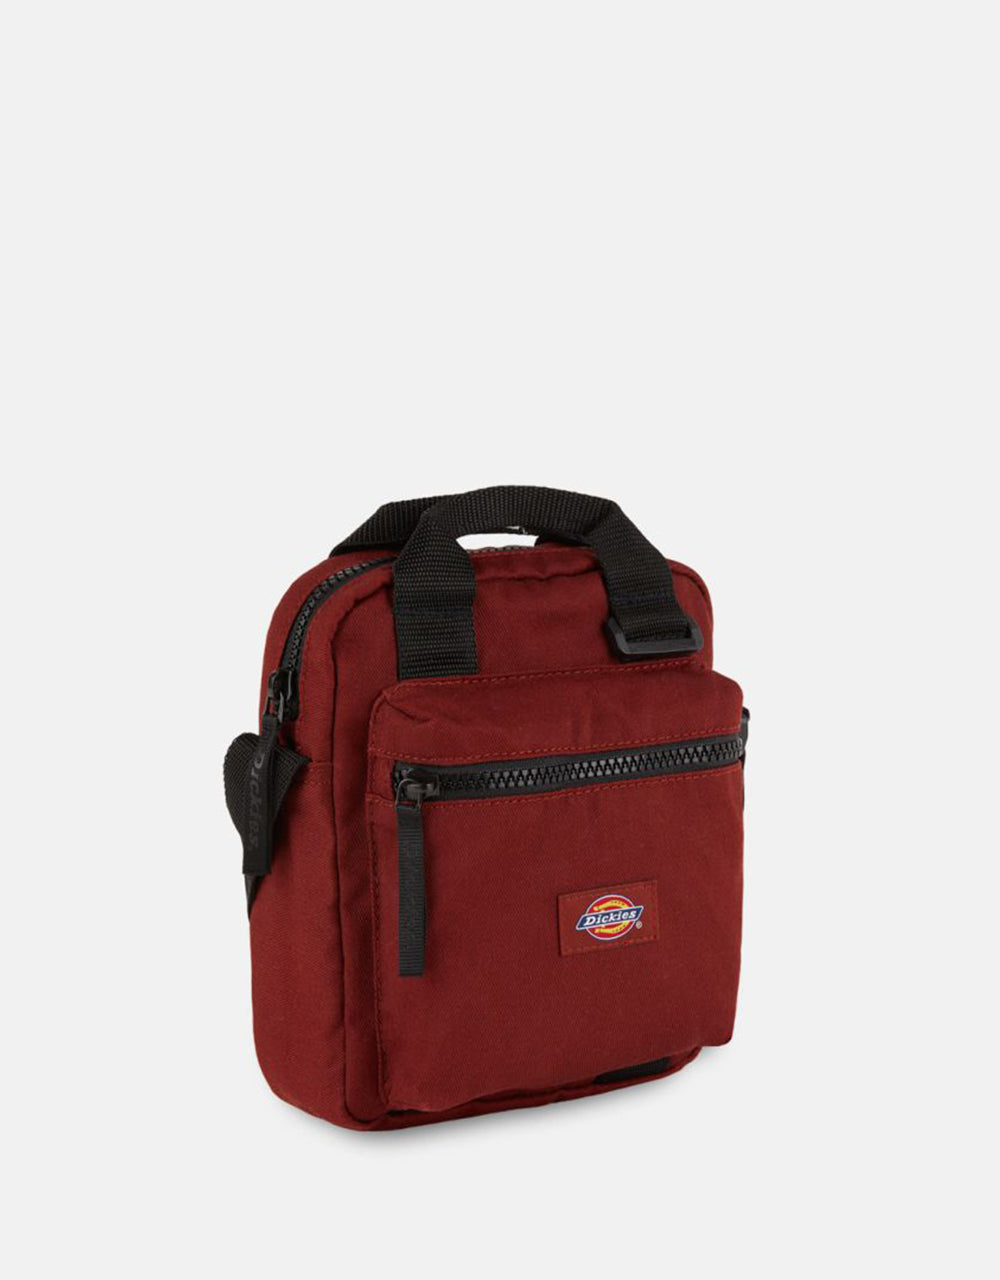 Dickies Moreauville Cross Body Bag - Fired Brick